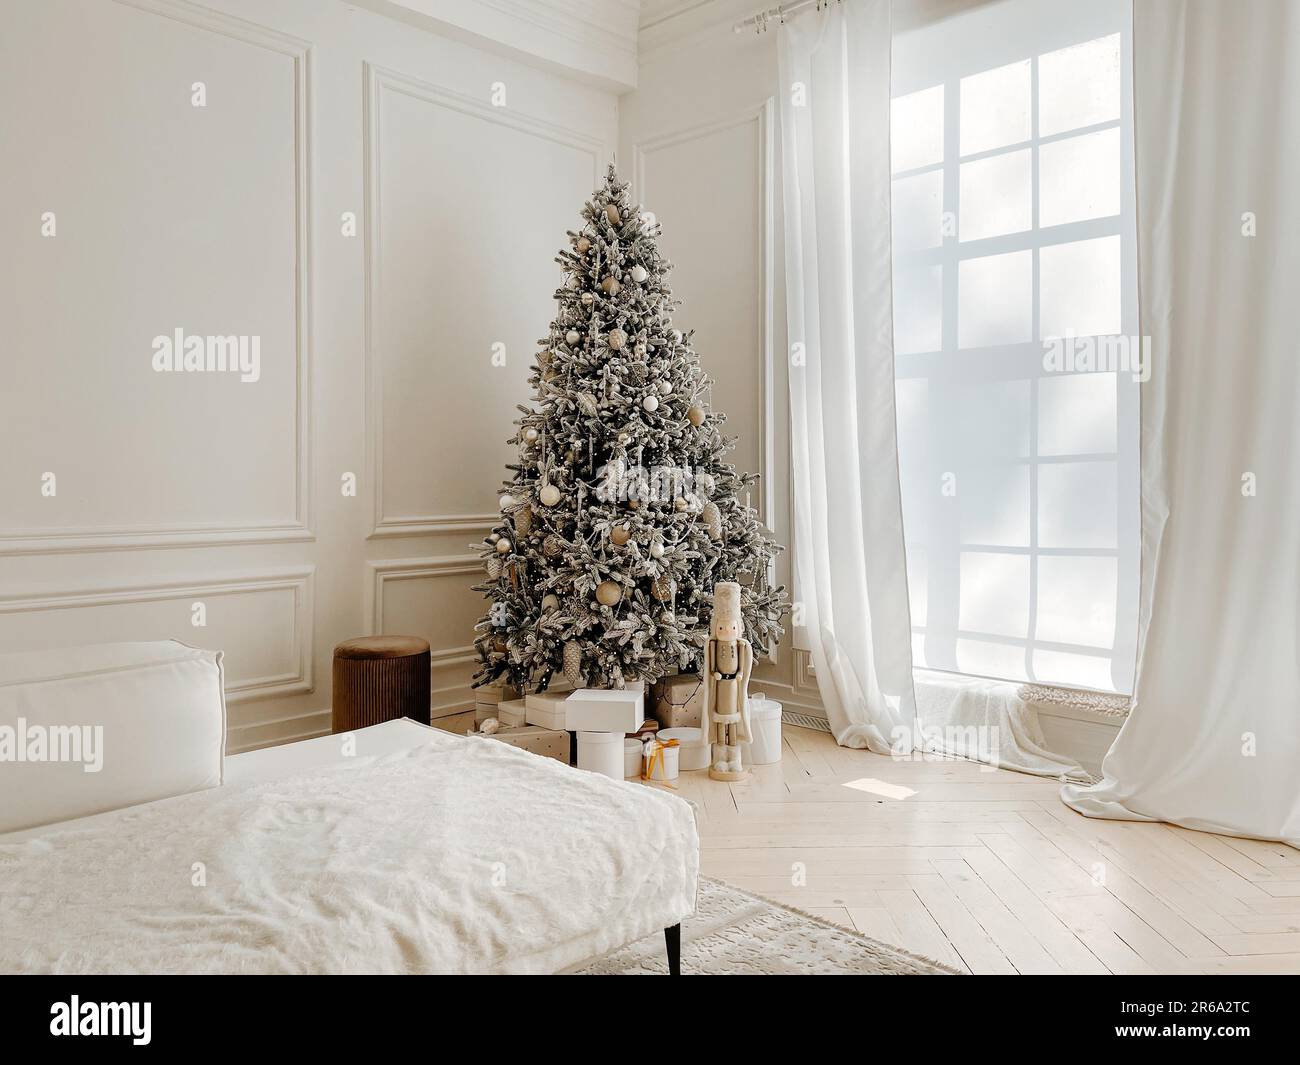 Studio decorations with stylish decorated Christmas tree with presents, toys, nutcracker next to big windows in white spacious living room with Stock Photo